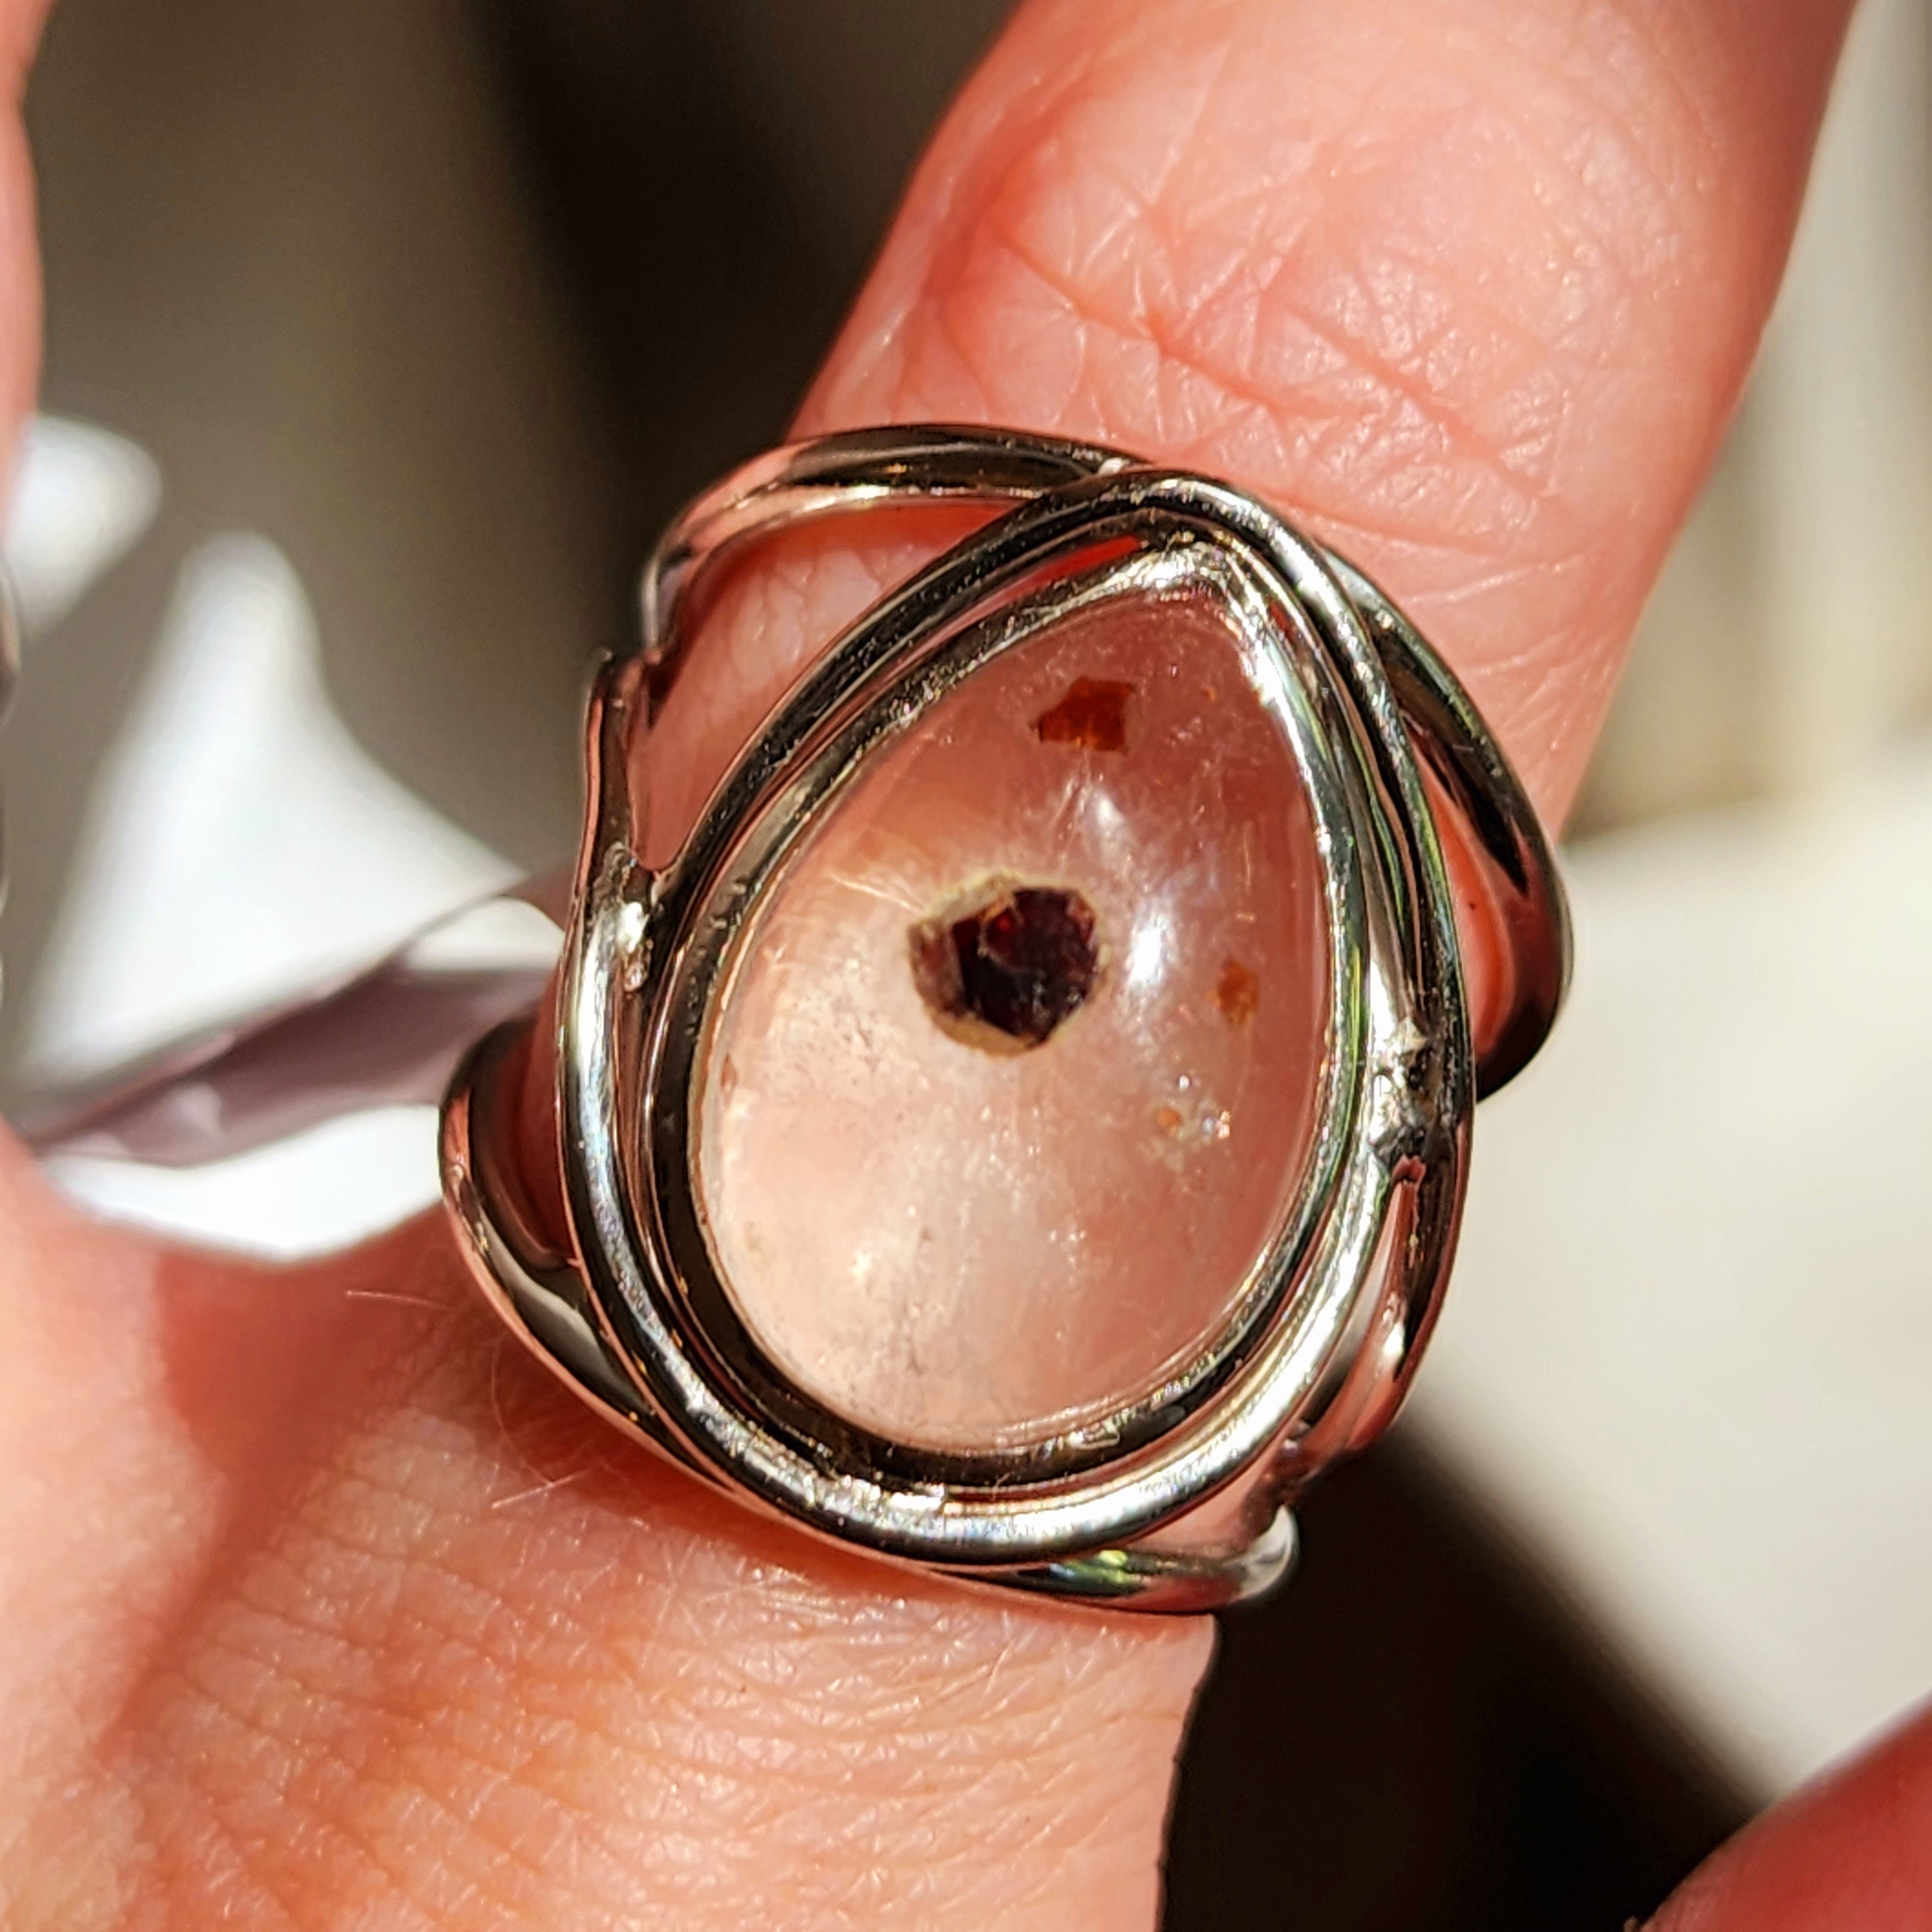 Garnet in Quartz Finger Cuff Adjustable Ring .925 Silver for Manifesting Health, Grounding and Stability